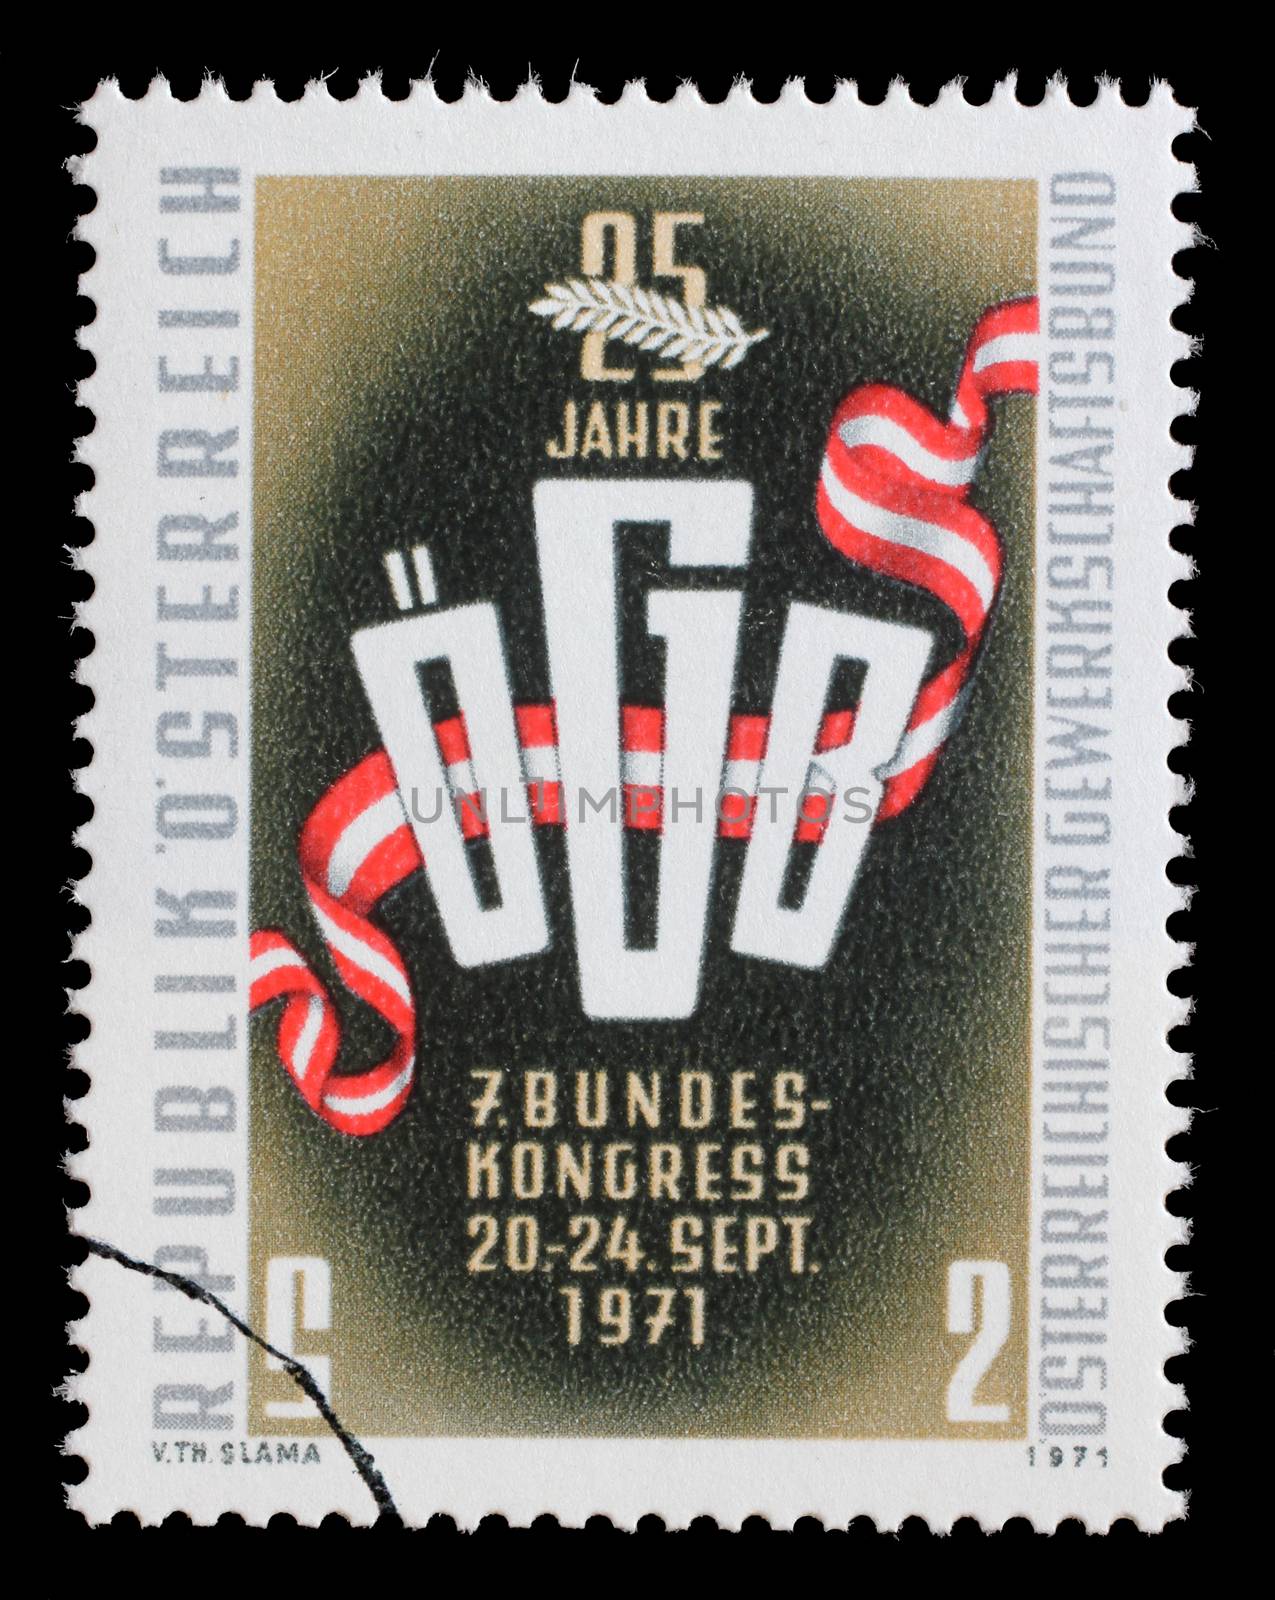 Stamp printed in the Austria shows Trade Union Emblem by atlas